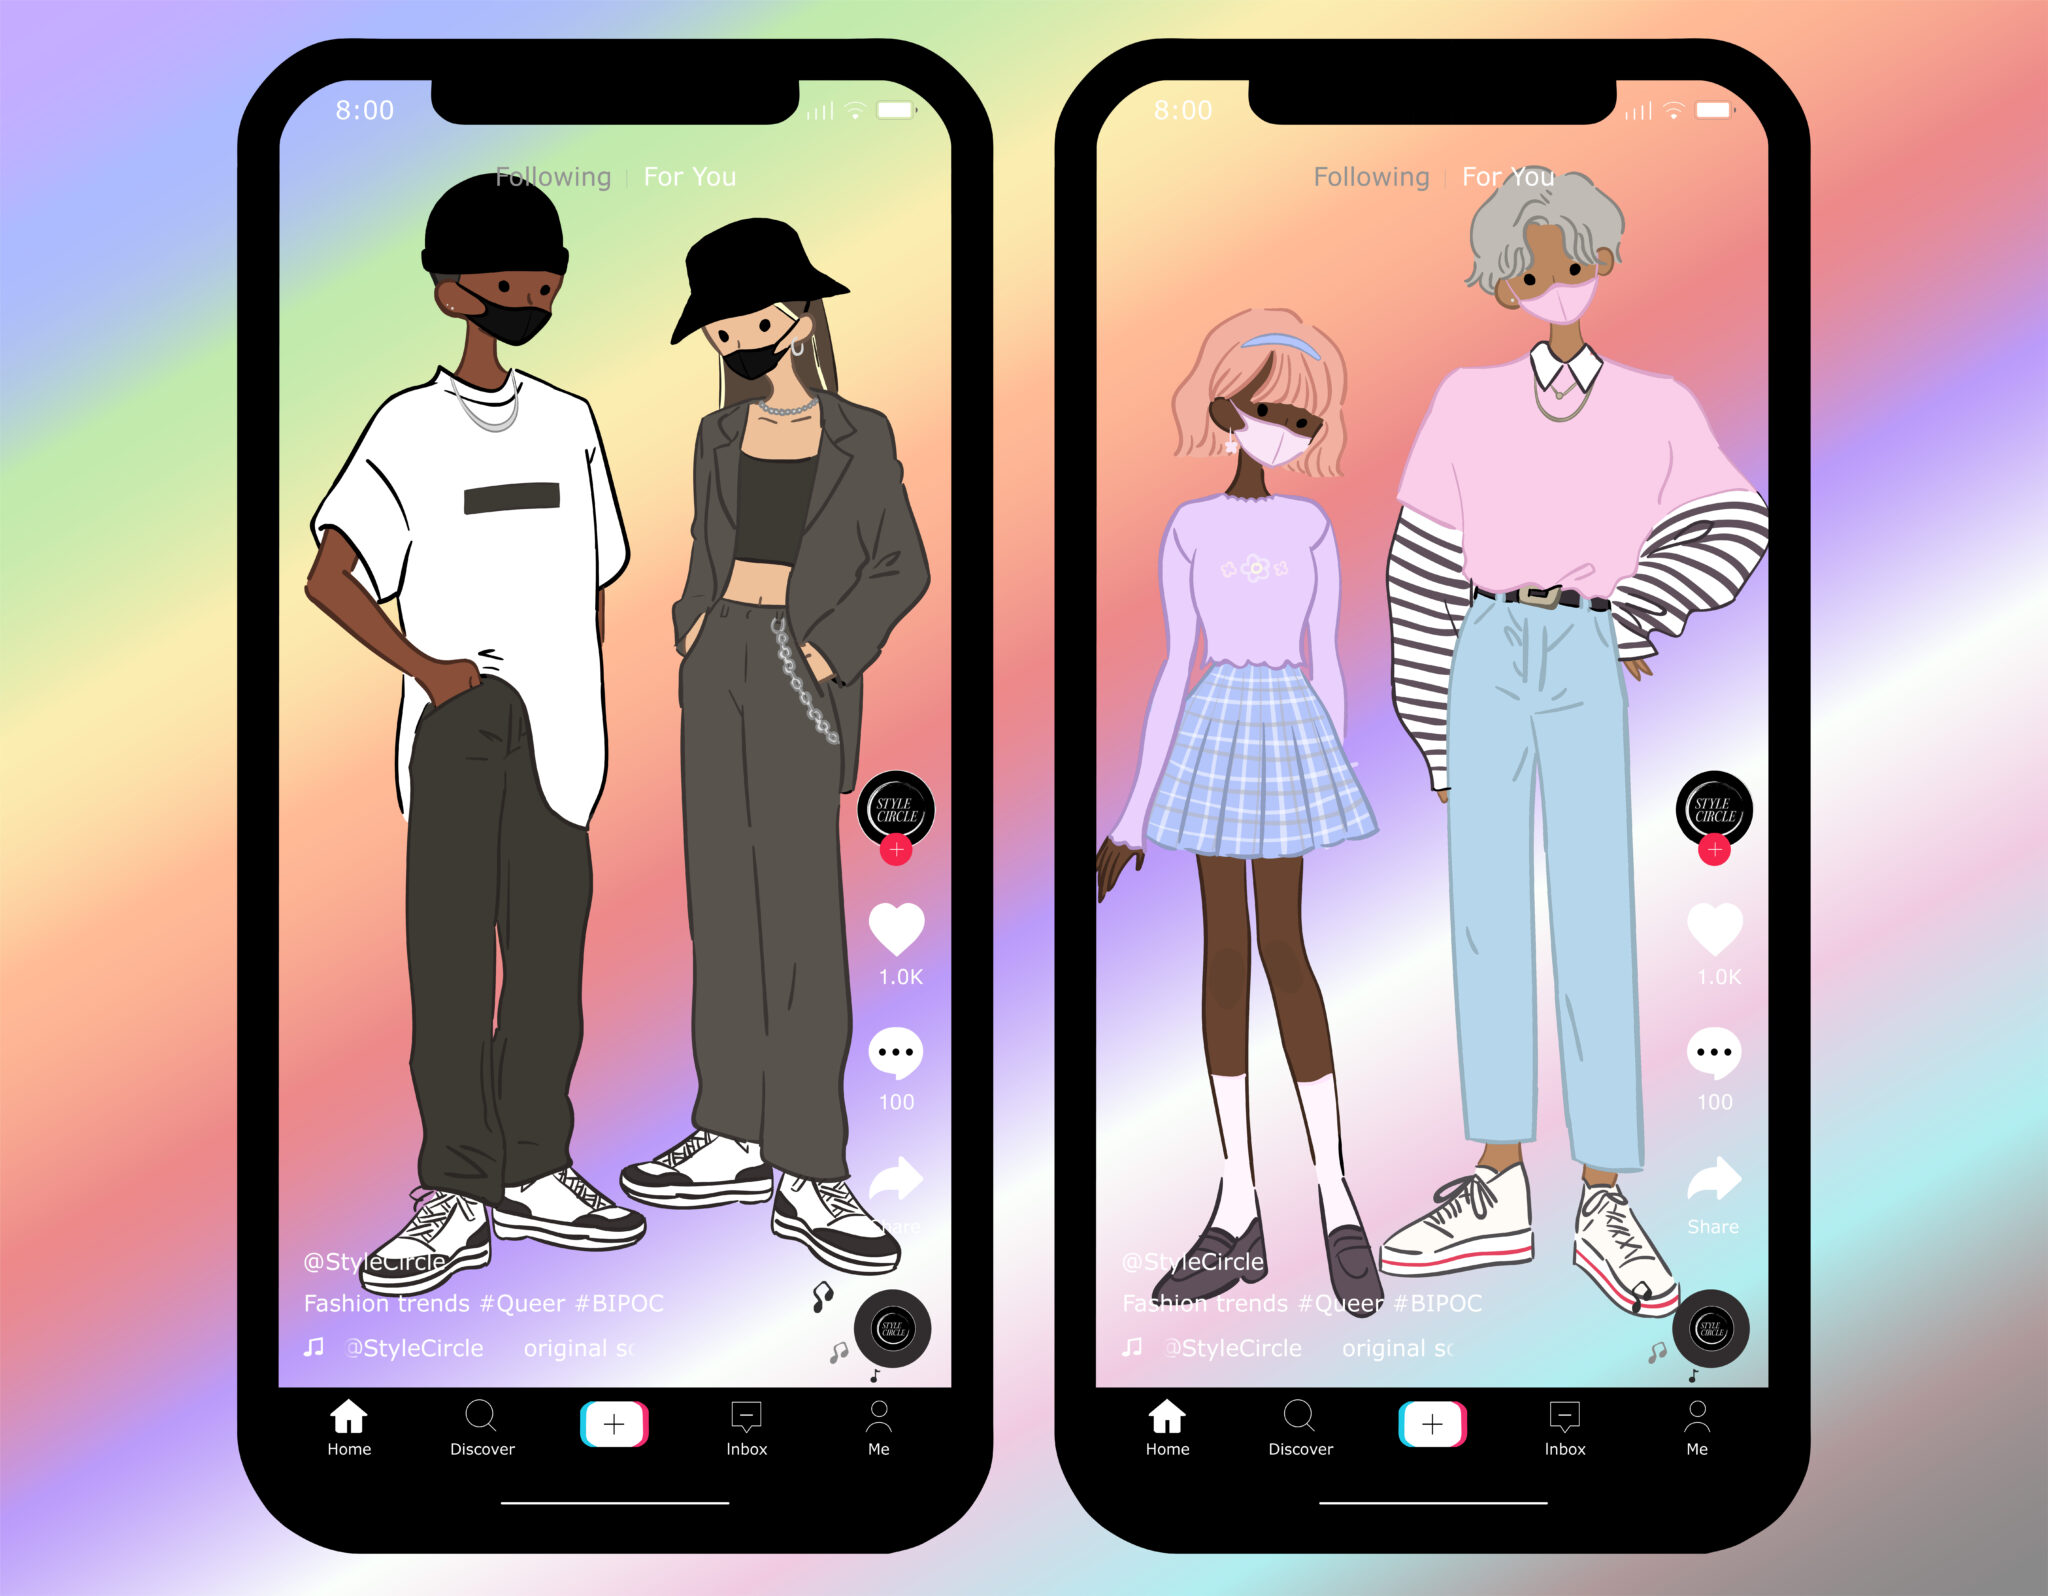 Illustration of two phones with the TikTok app on screen, each displaying a male and female standing side by side.